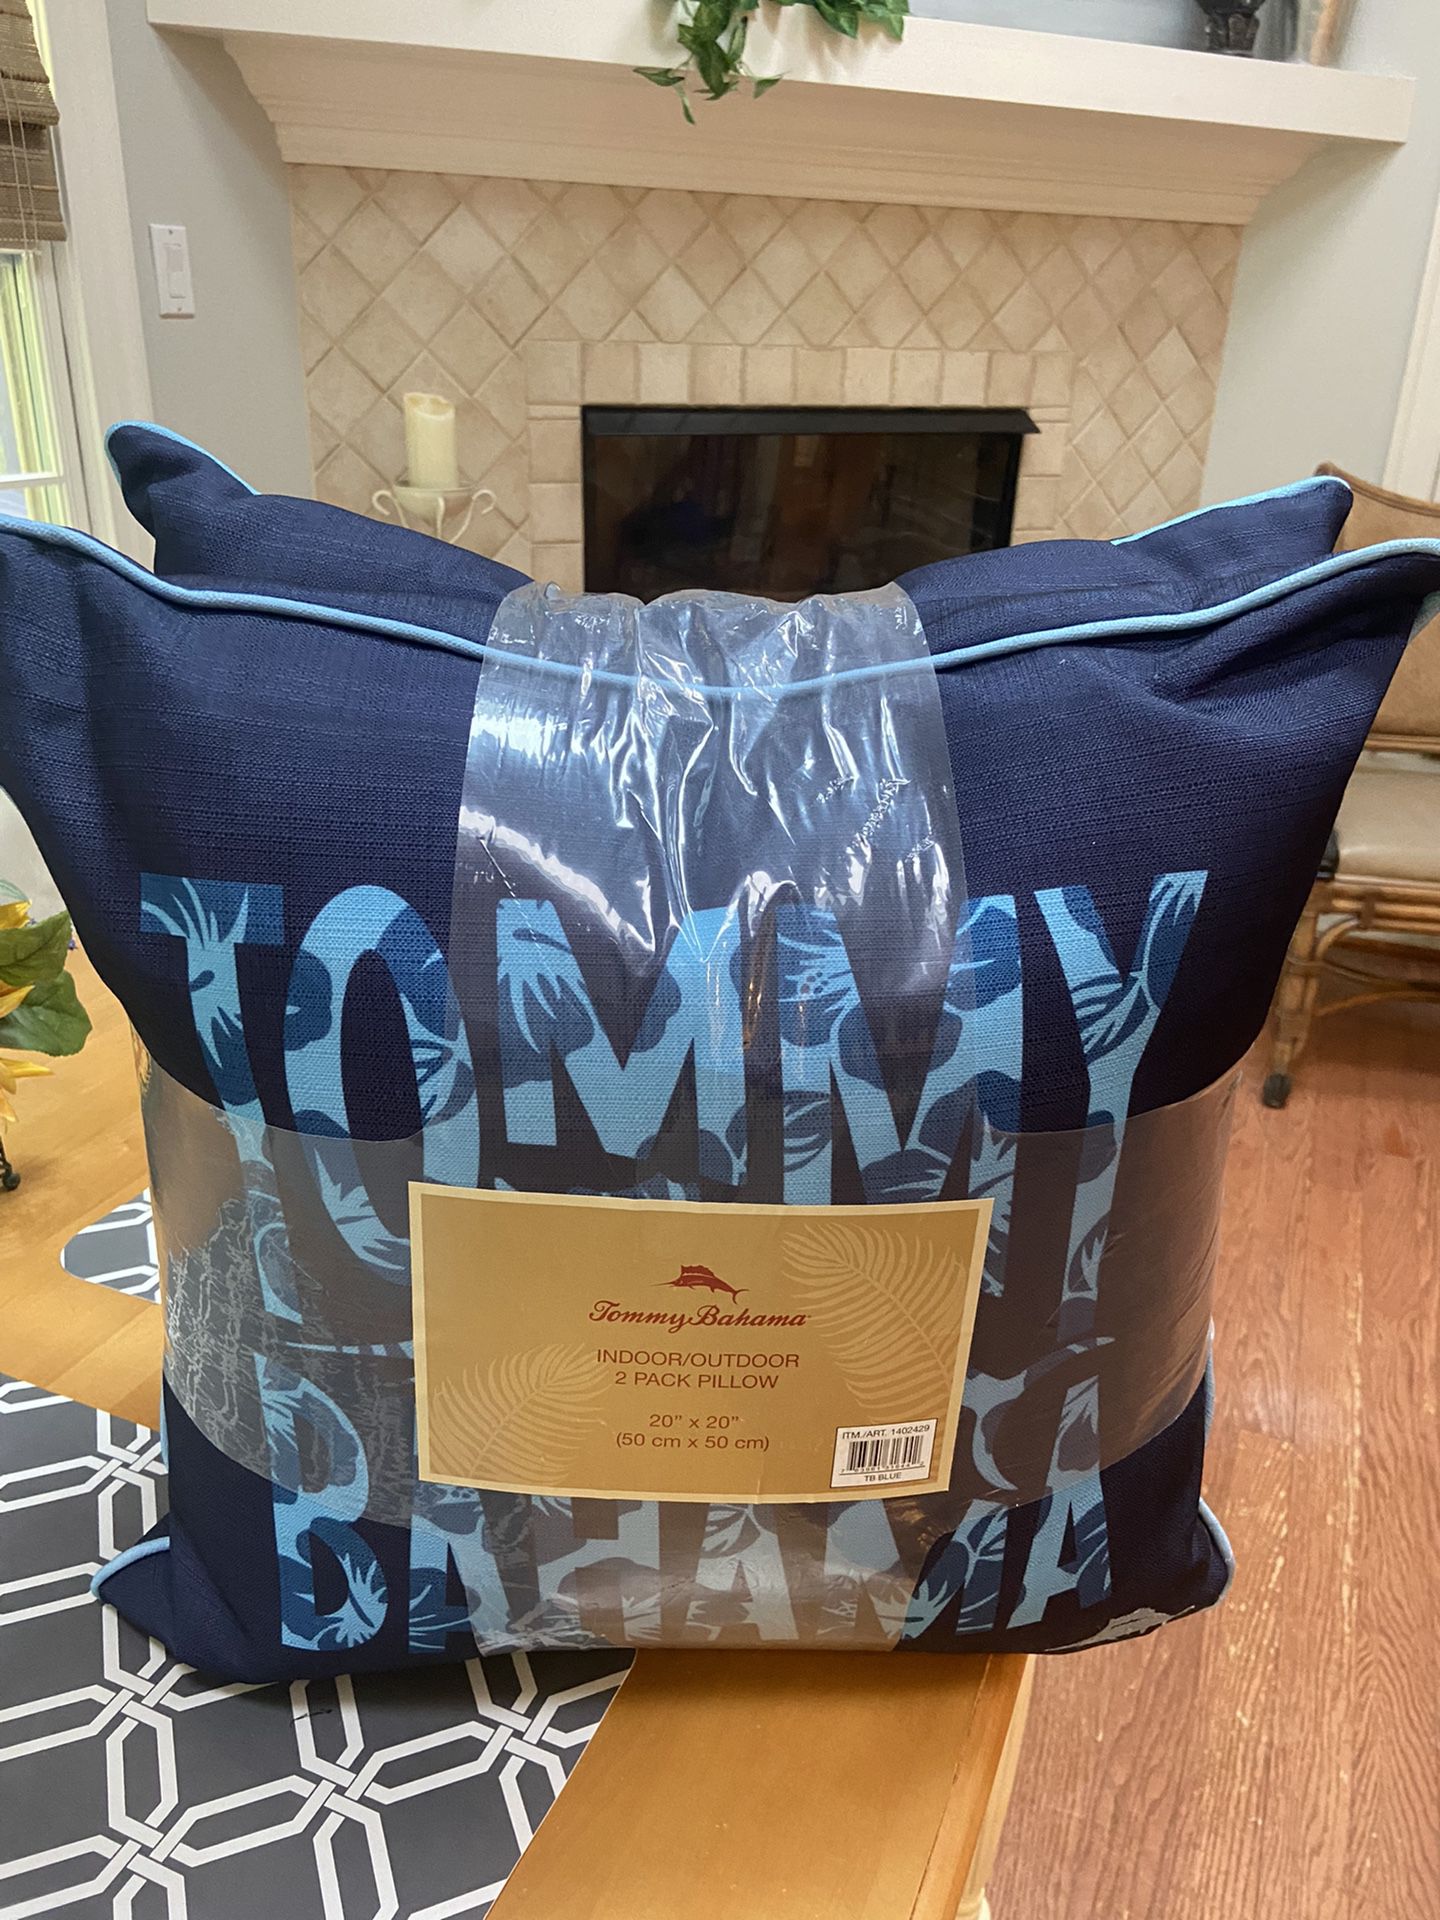 Tommy Bahama Pillows (2) Brand New Indoor/outdoor